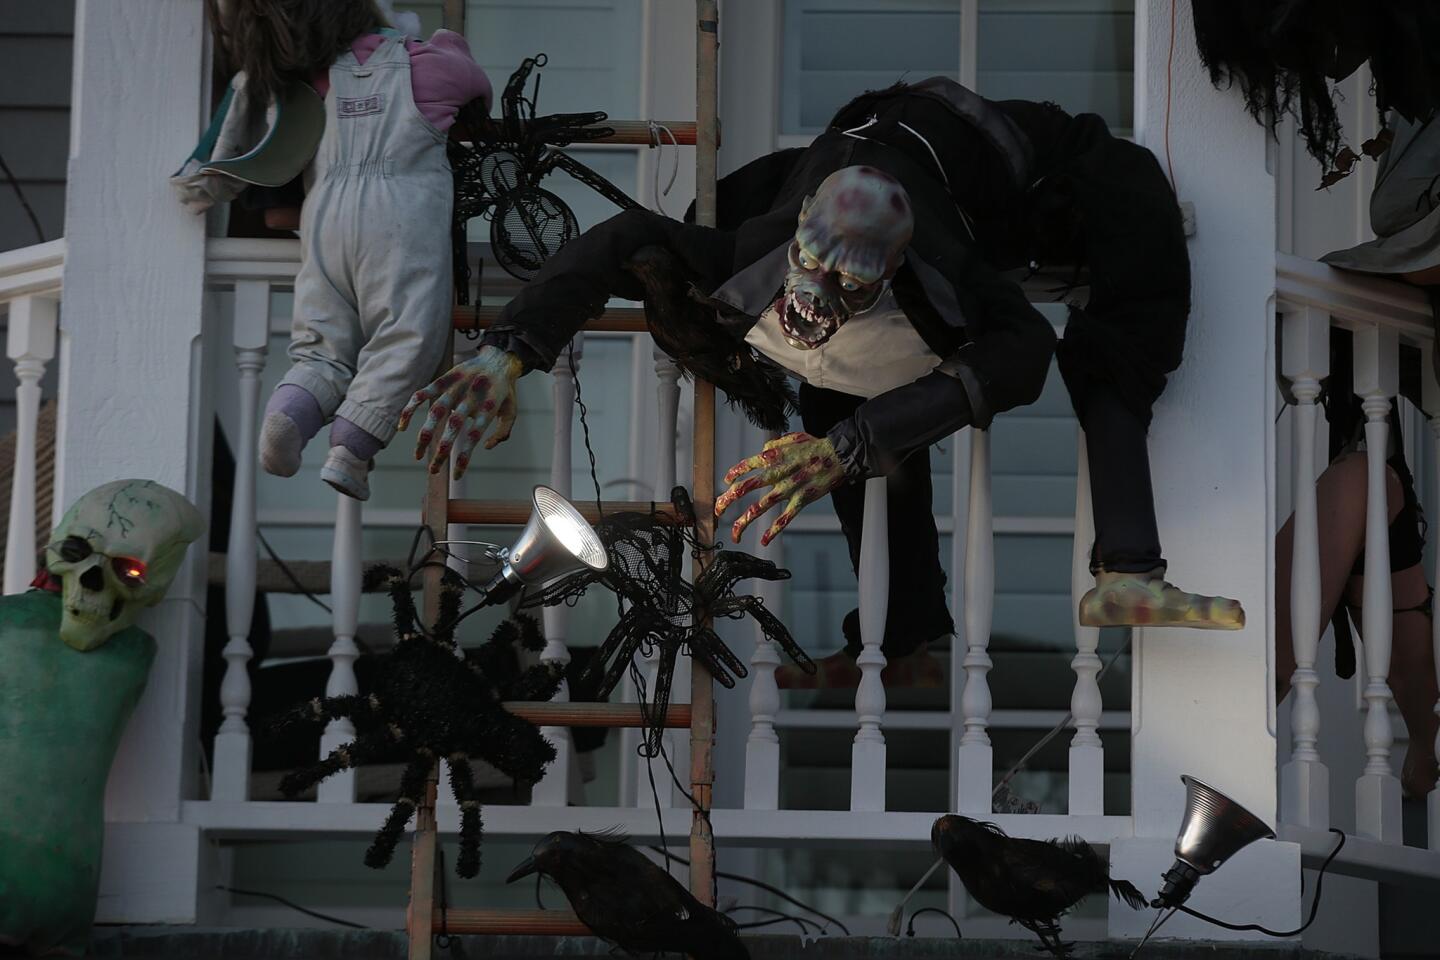 Creepy and whimsical figures adorn the home of Jim and Peggy Rich on Balboa Island. The Riches are one of dozens of families on the island who elaborately decorate their homes for Halloween.